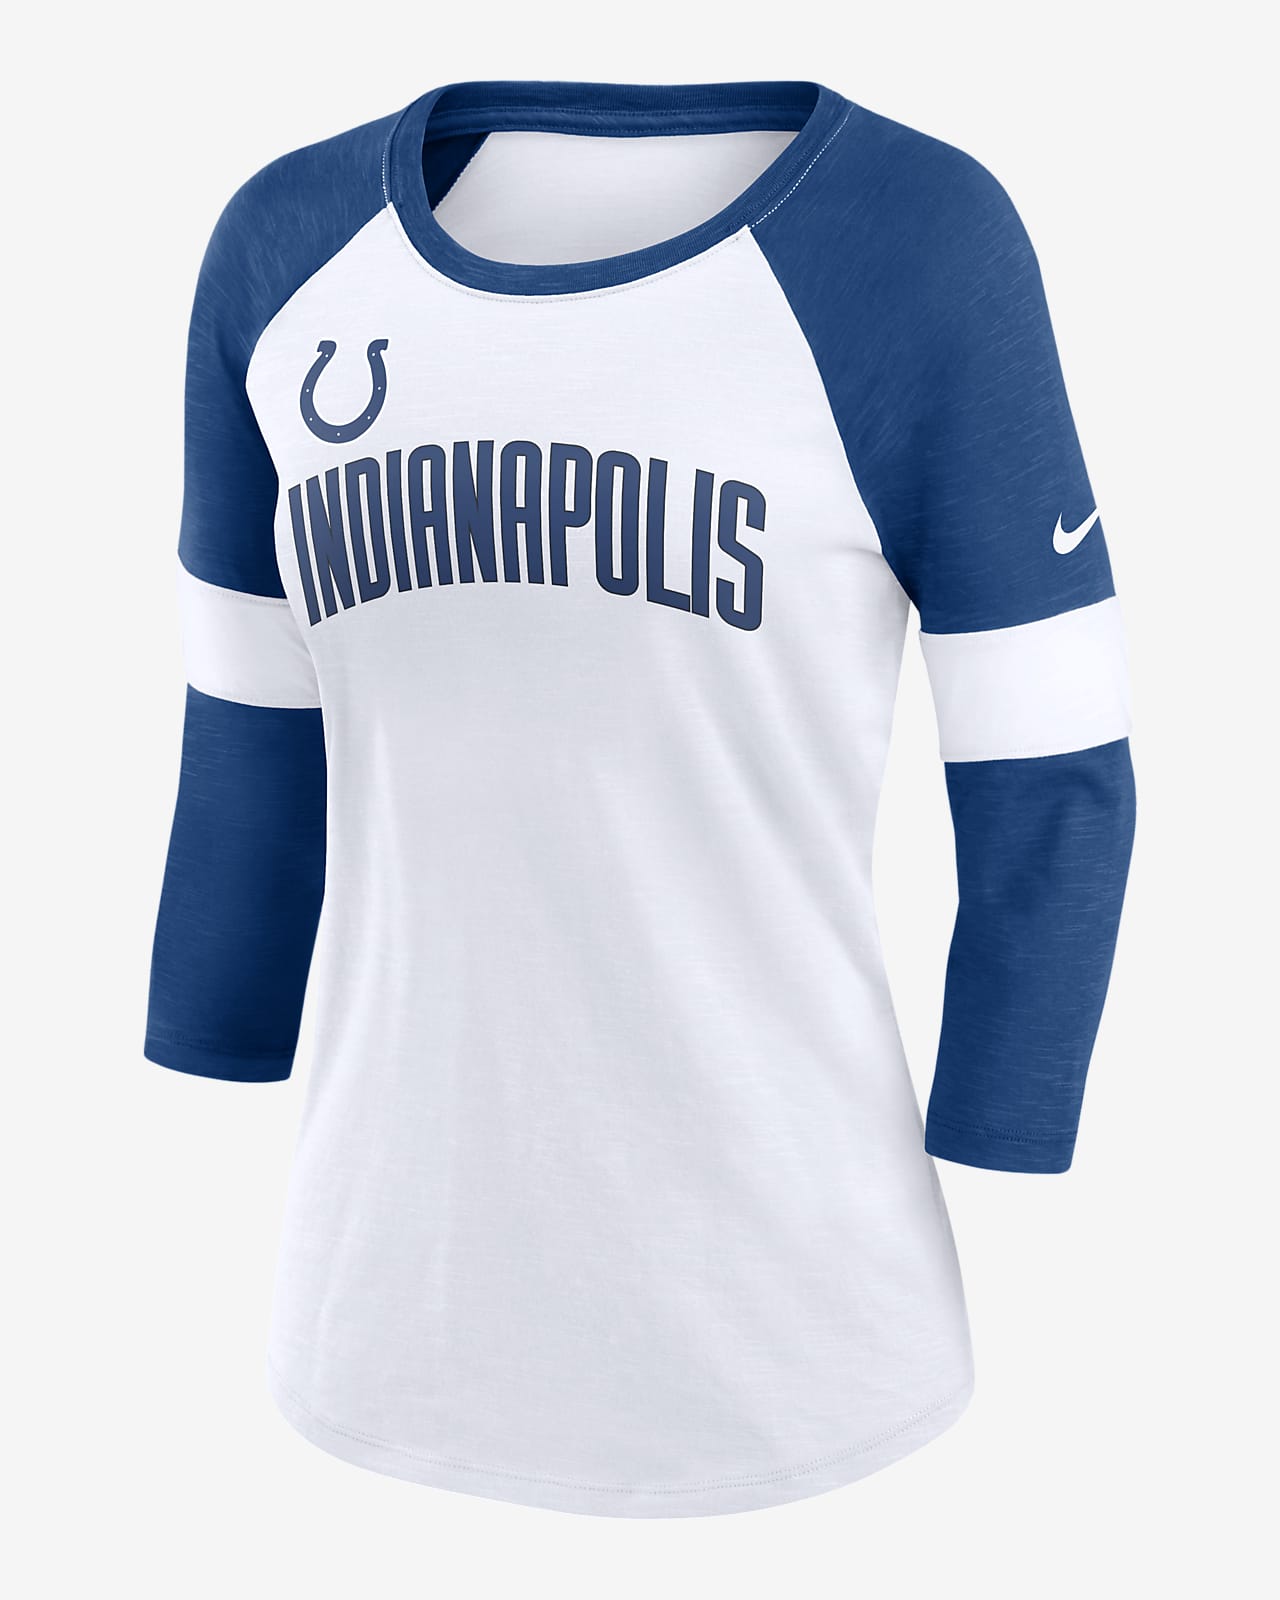 Nike Pride (NFL Indianapolis Colts) Women's 3/4-Sleeve T-Shirt